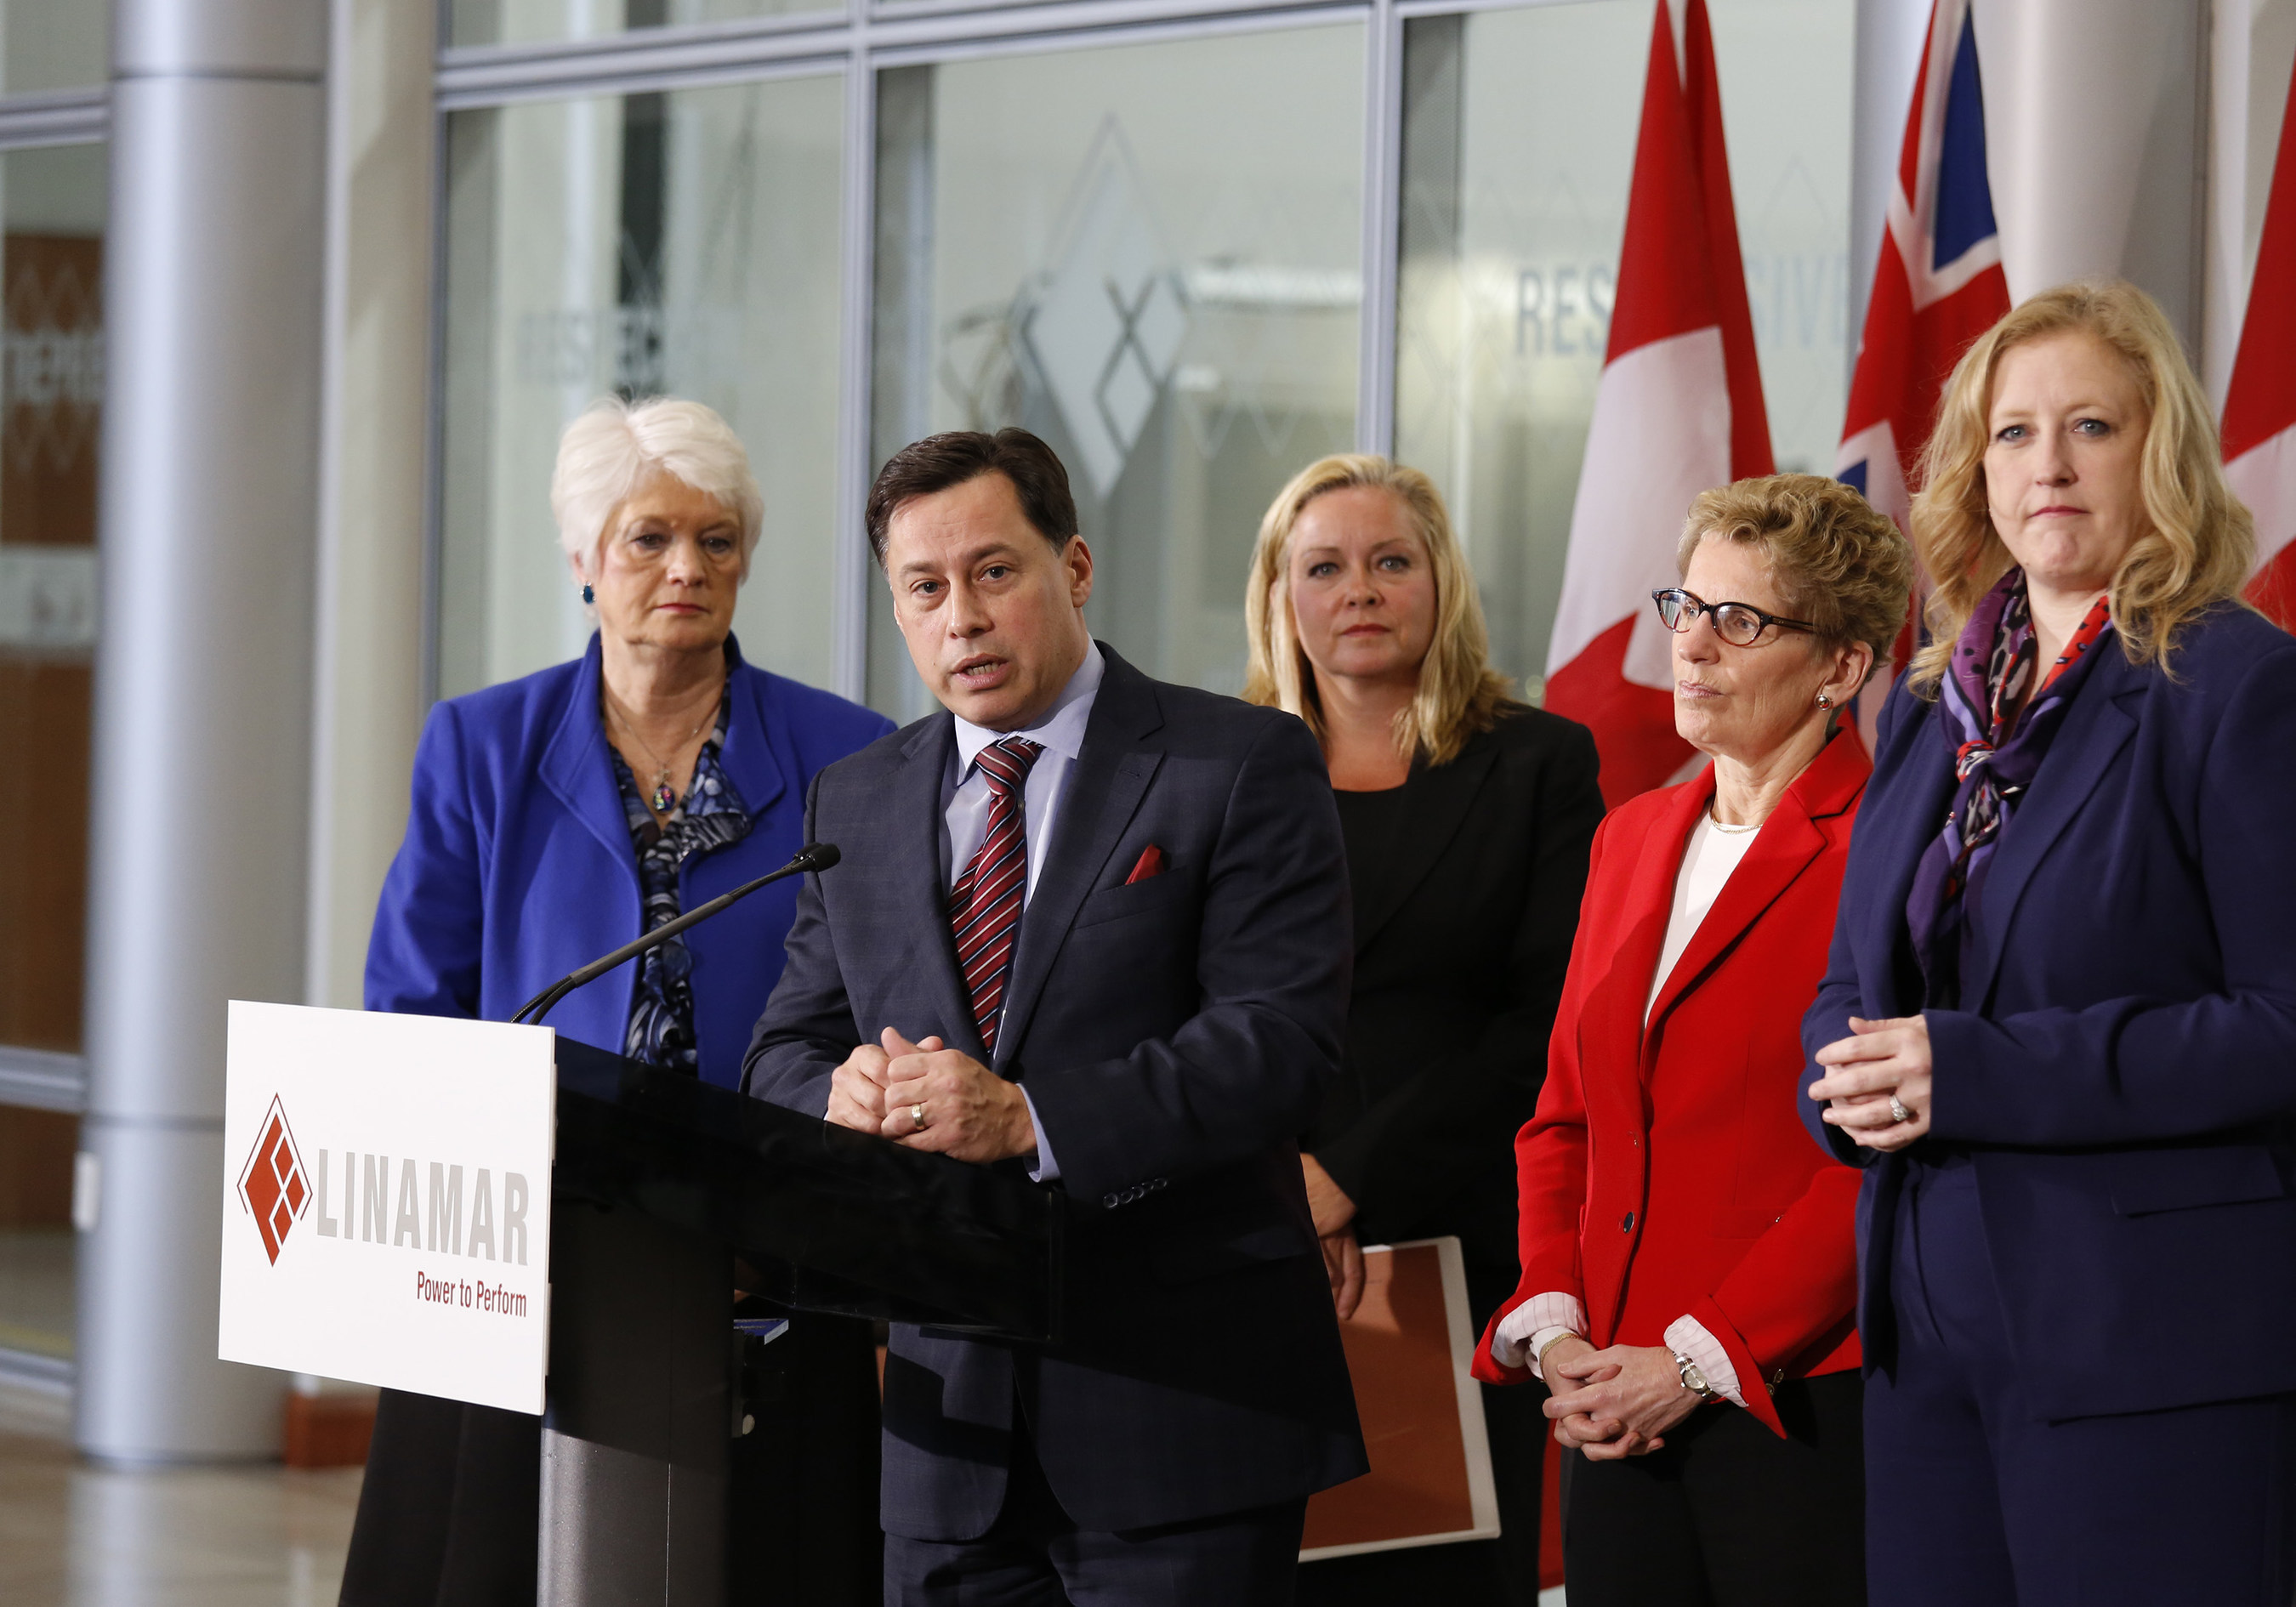 Ontario, Canada’s skilled workforce and R&D expertise were among factors that drew global auto parts company Linamar to invest over $500 million in Ontario. The investment will include $50.25 million in support from Ontario and create 1,200 jobs. Minister of Economic Development, Employment & Infrastructure Brad Duguid said “Today’s announcement demonstrates Ontario’s ongoing commitment to partnering with the auto industry and its workers to create long-term growth and global competitiveness.”